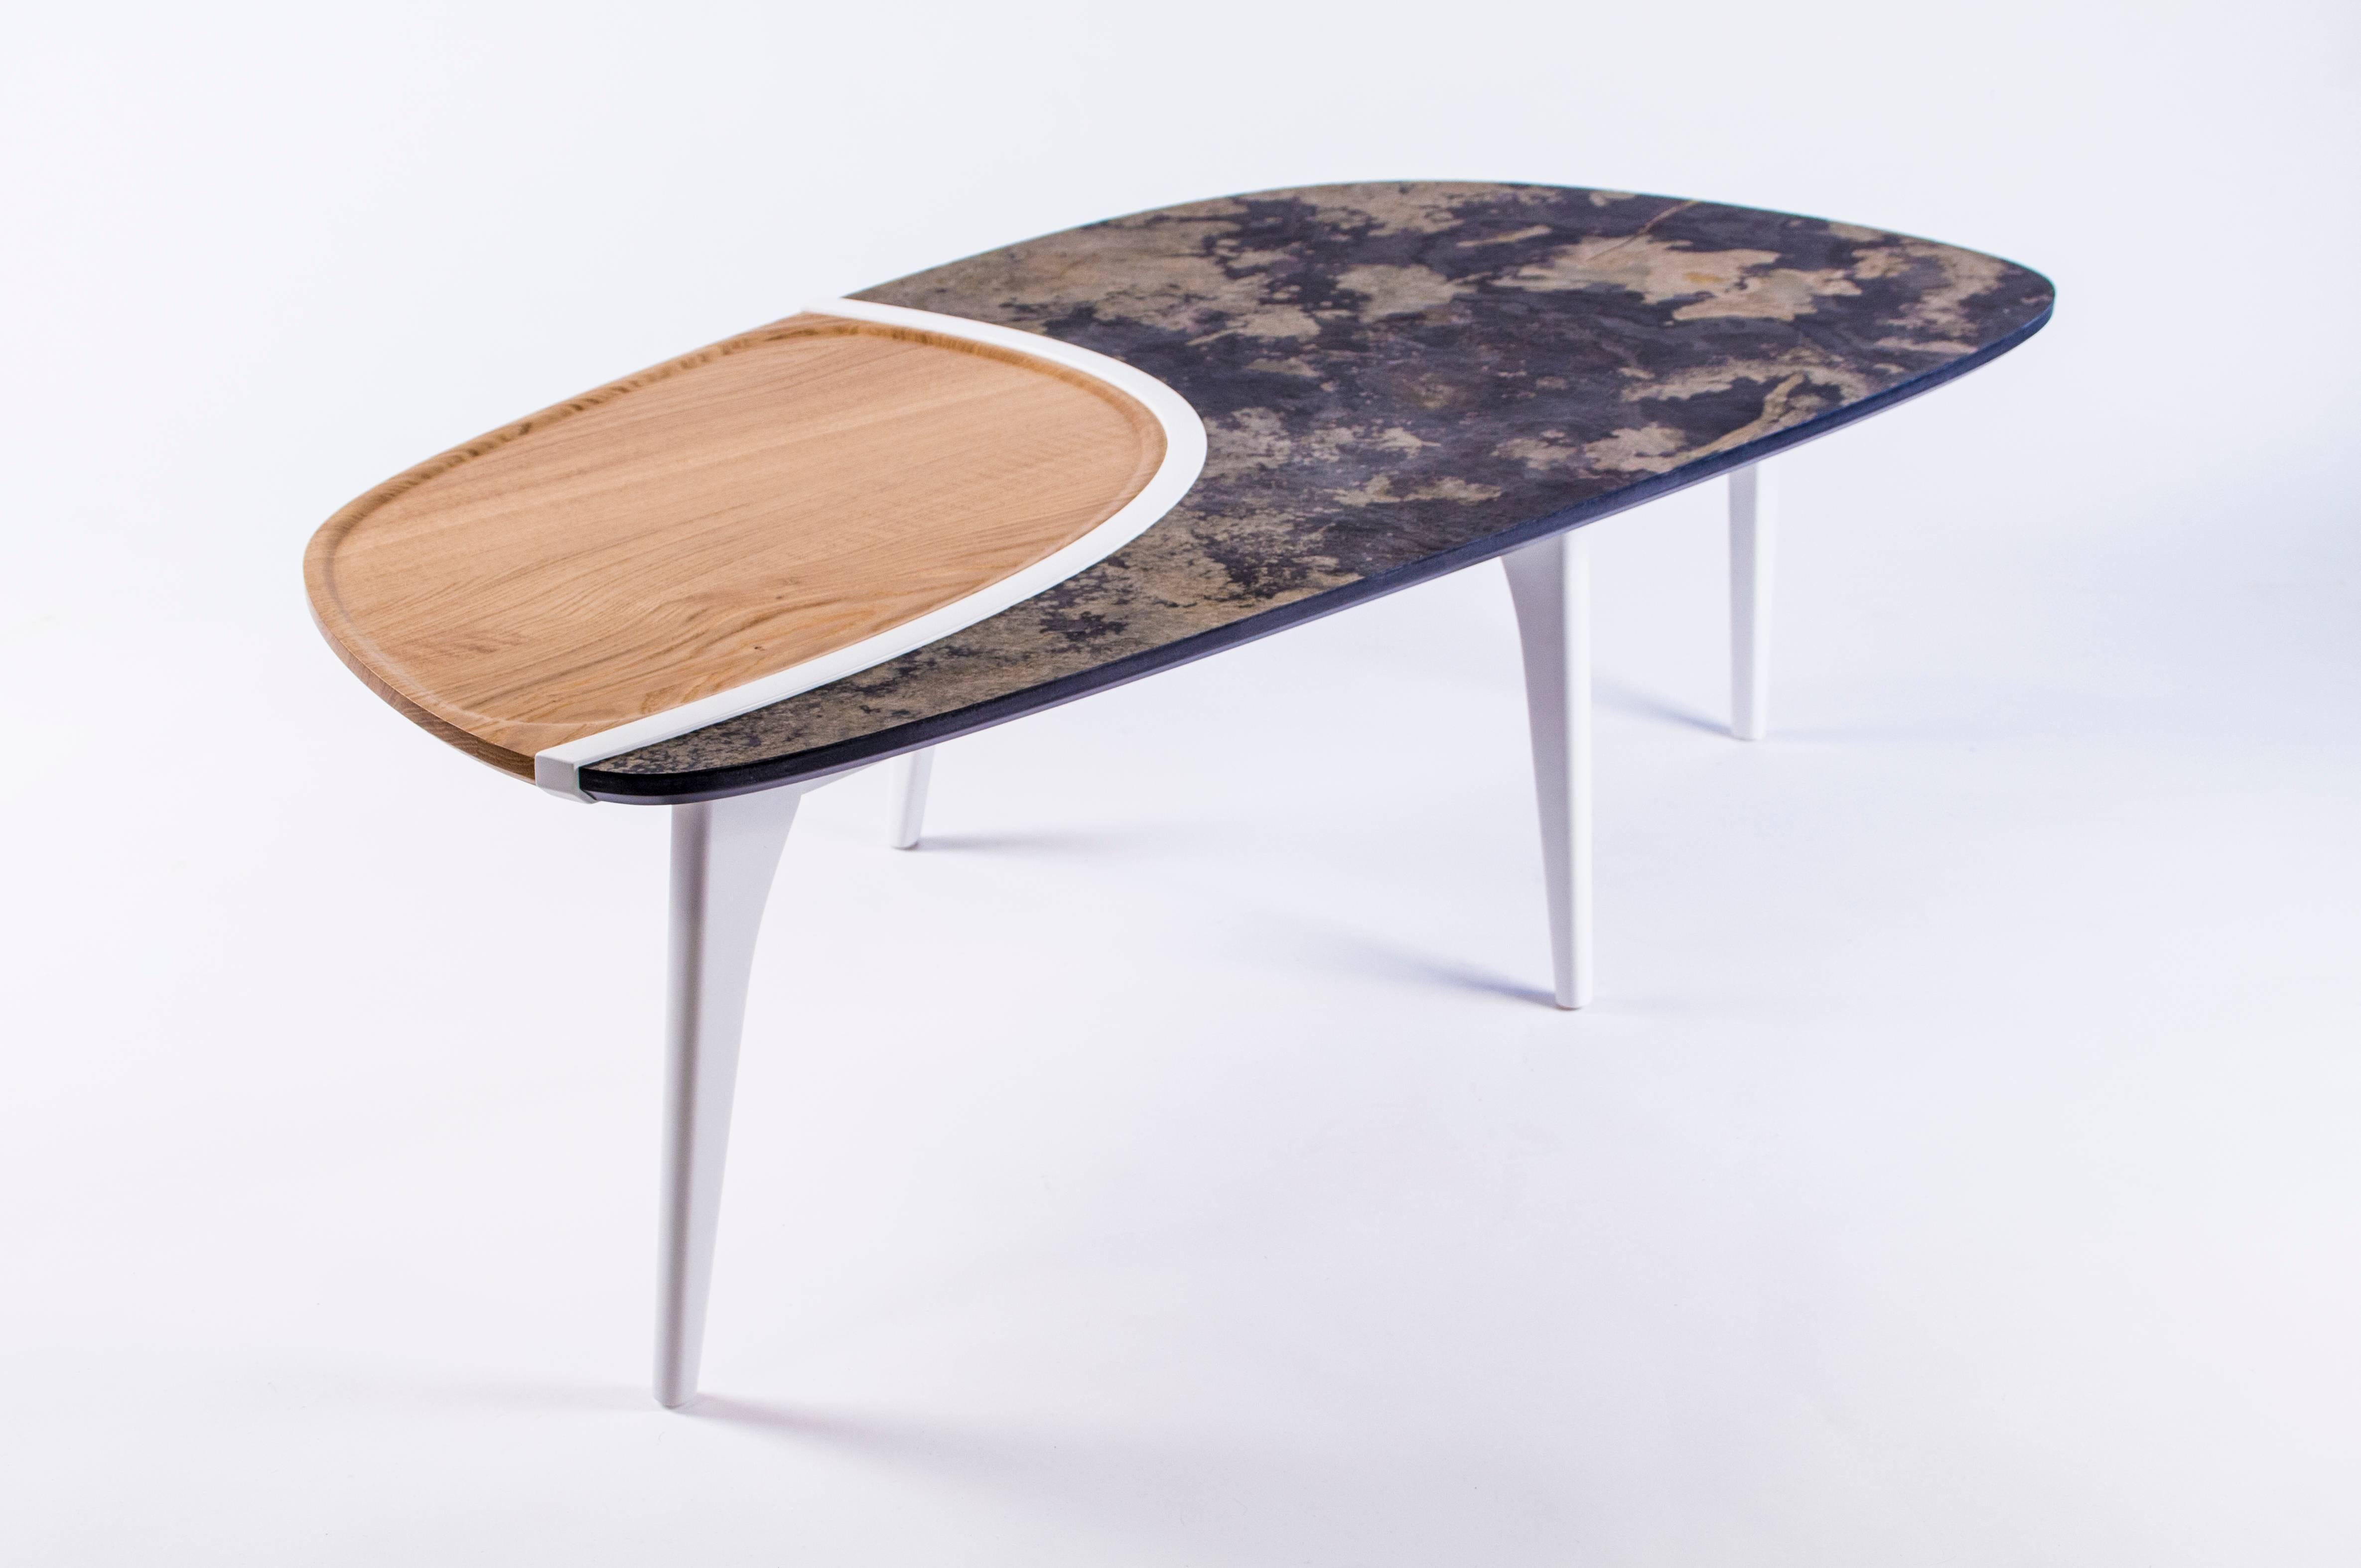 Created by a talented designer, the great table presents an unique combination among high and new technology, materials and lines.
Choice of two different colors and materials combination as seen in these pictures.
This centre table is made